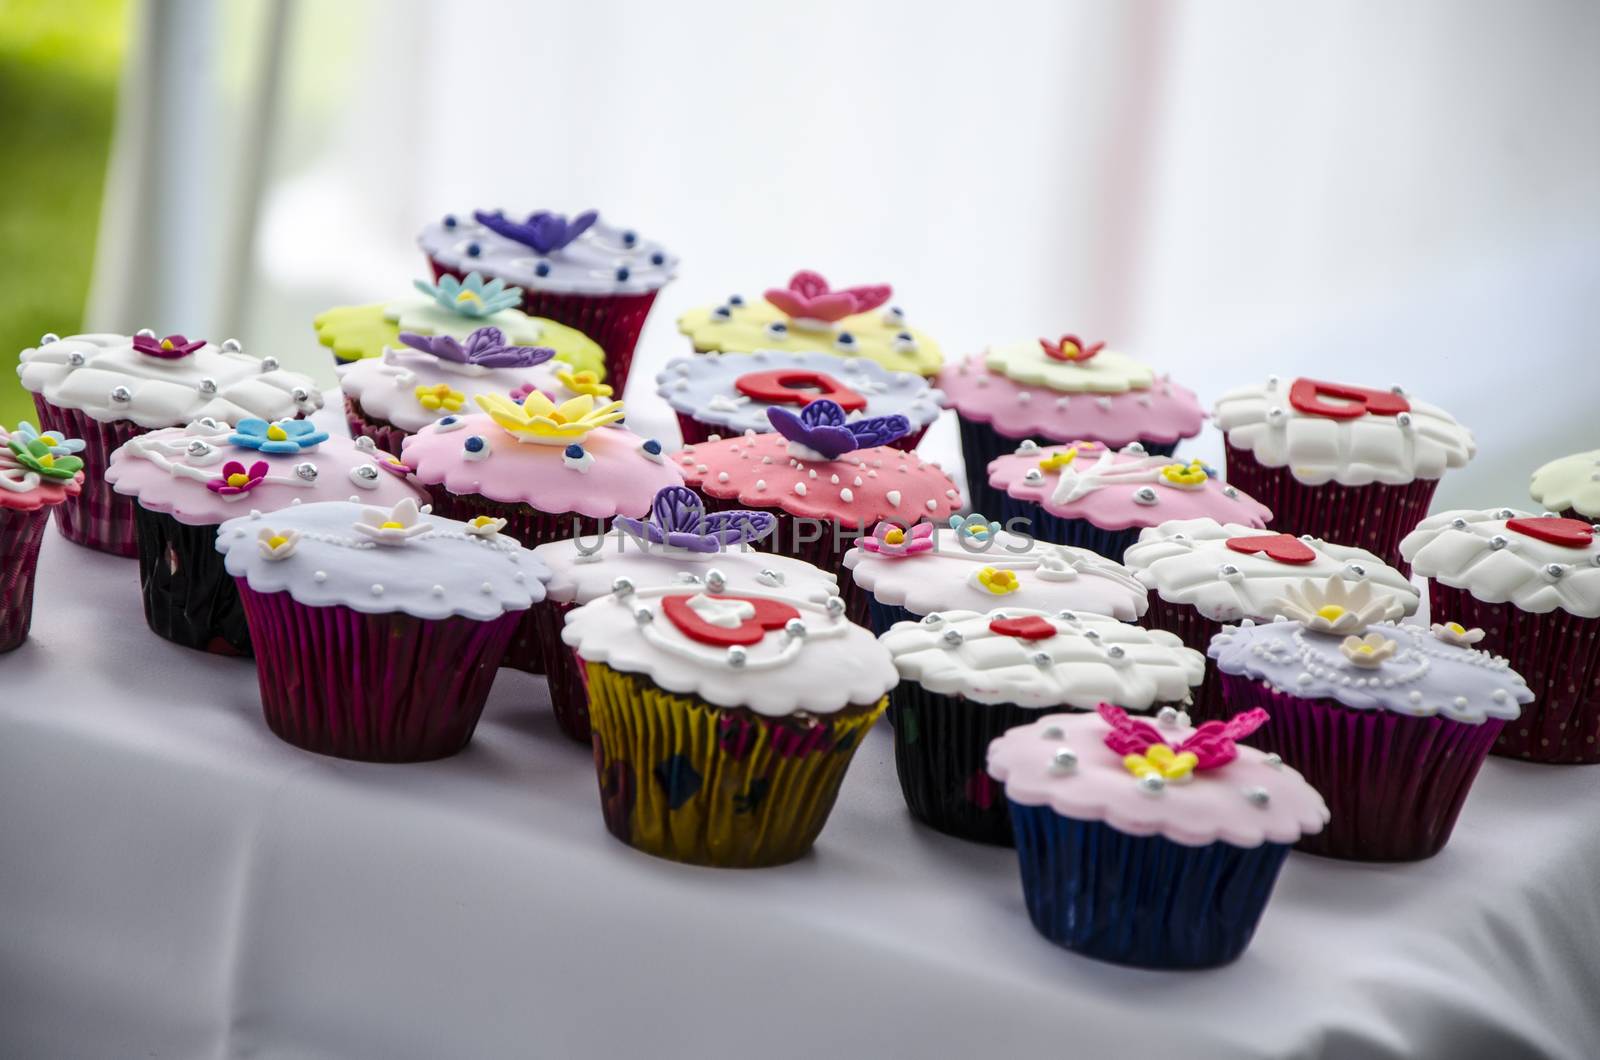 Cupcakes on the sweet table of a wedding